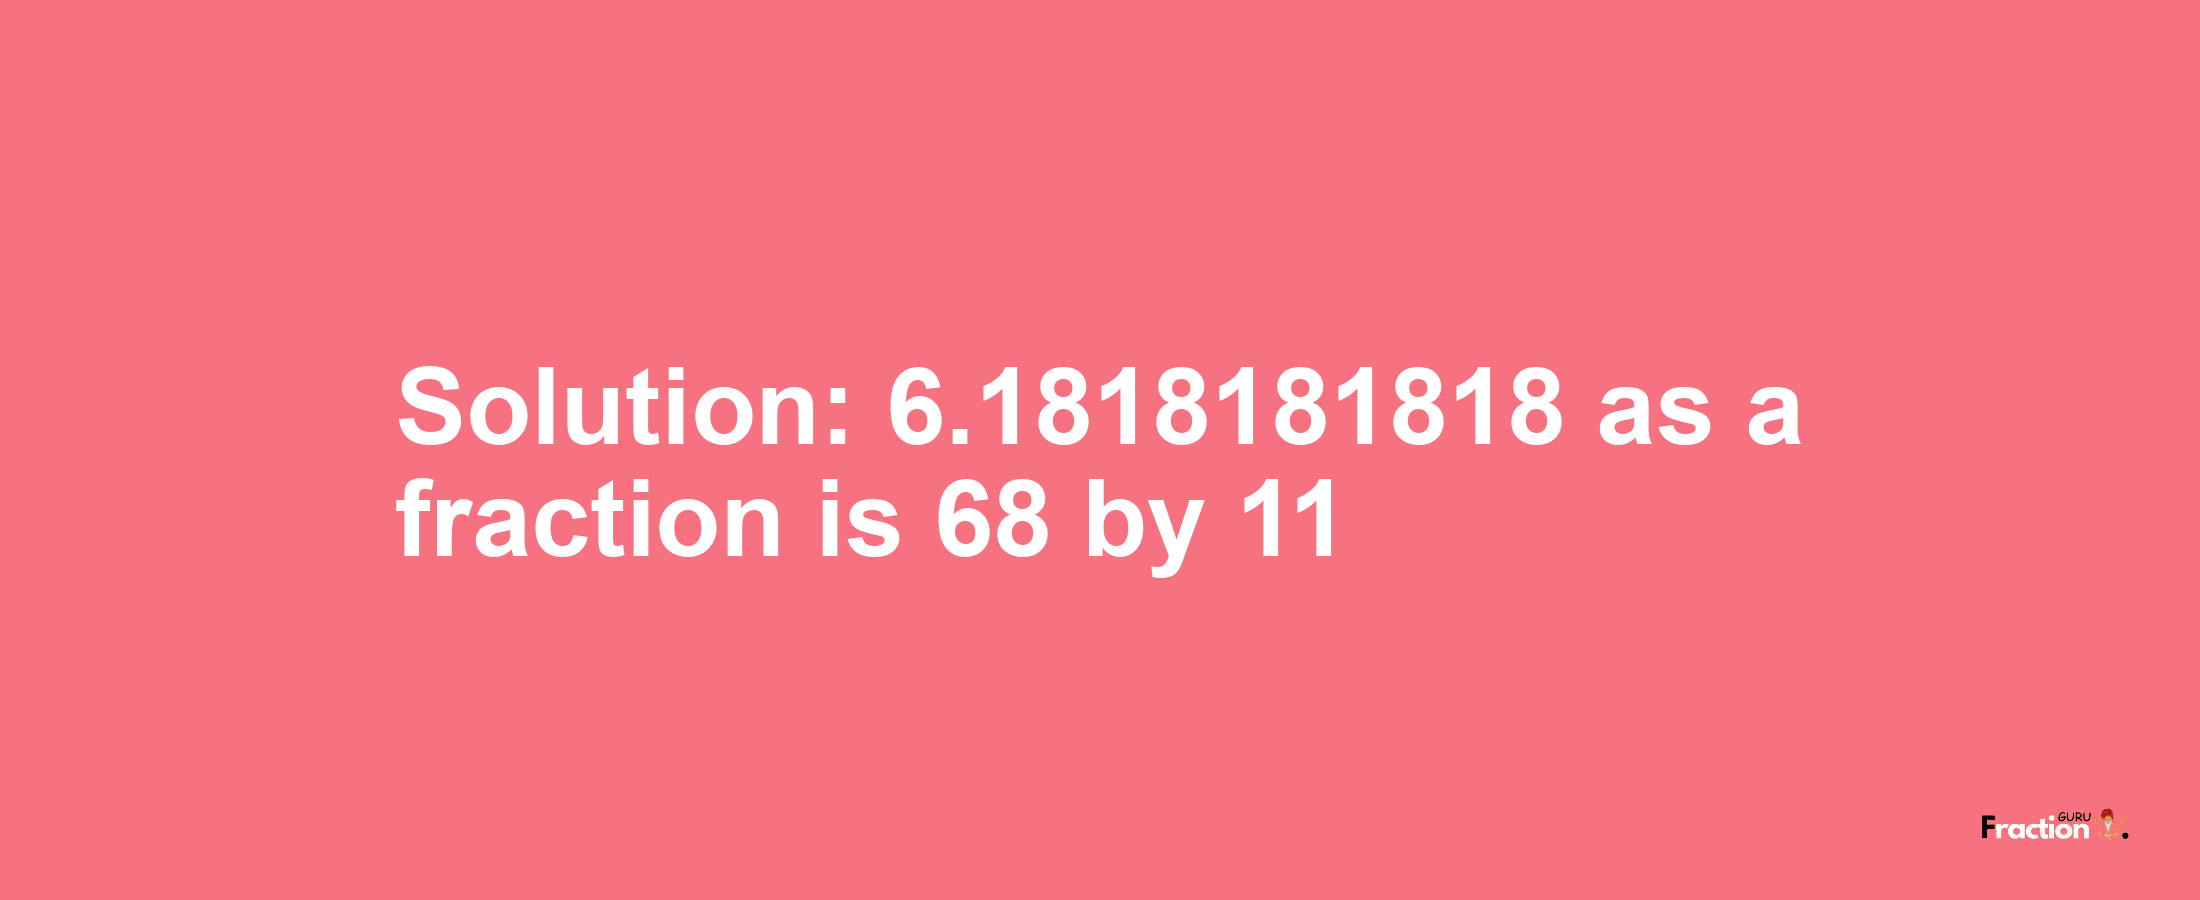 Solution:6.1818181818 as a fraction is 68/11